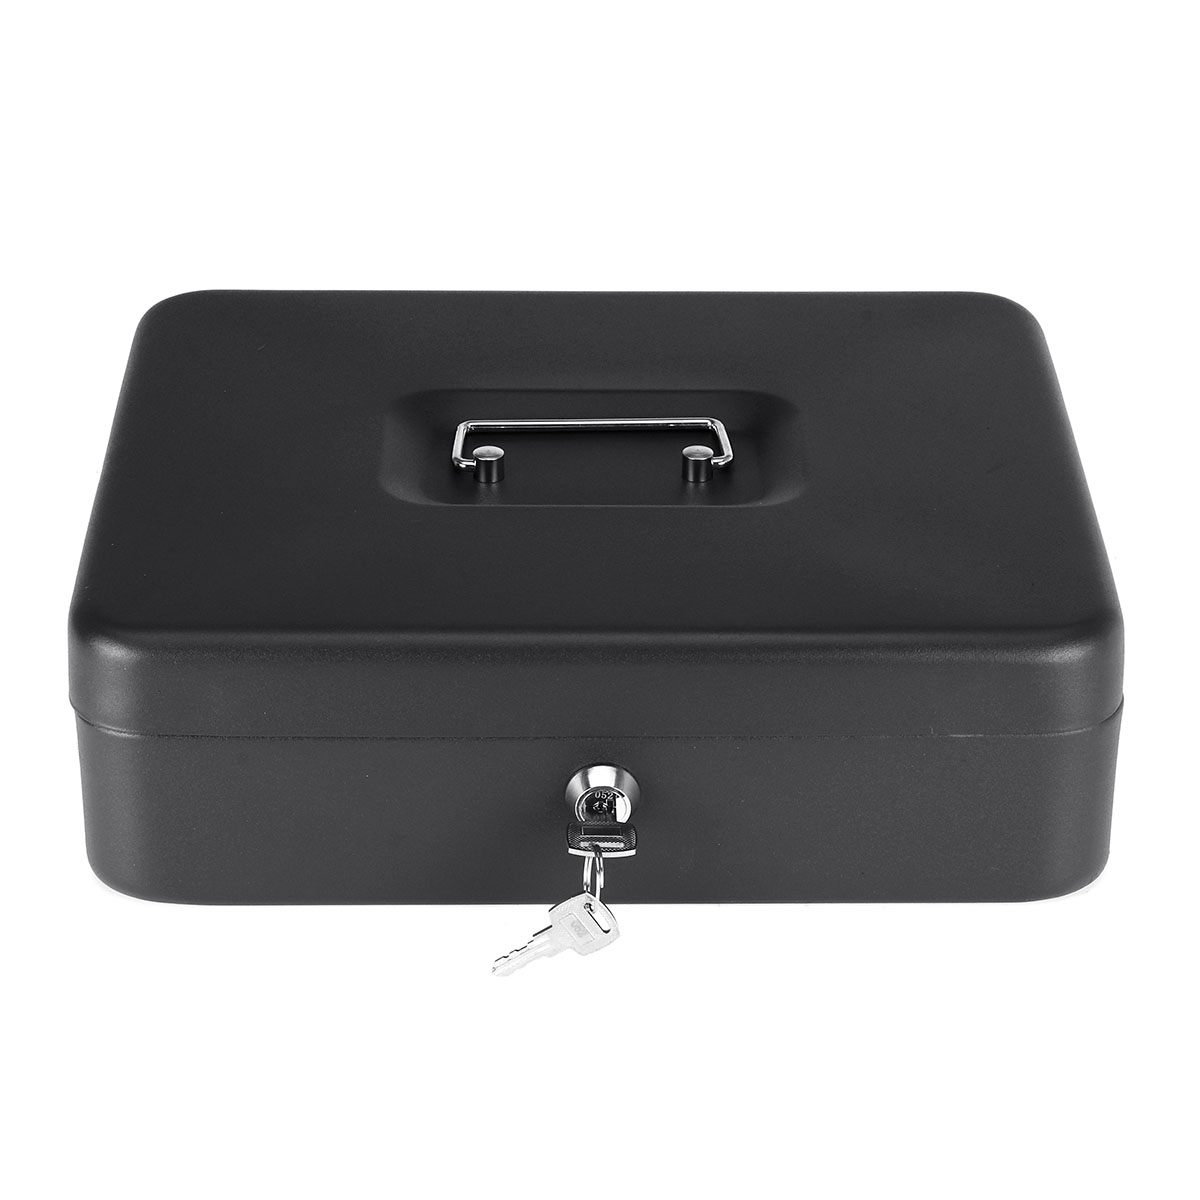 4-Bill-5-Coin-Cash-Drawer-Tray-Storage-Box-for-Cashier-Money-Security-Lock-Safe-Box-1457105-3